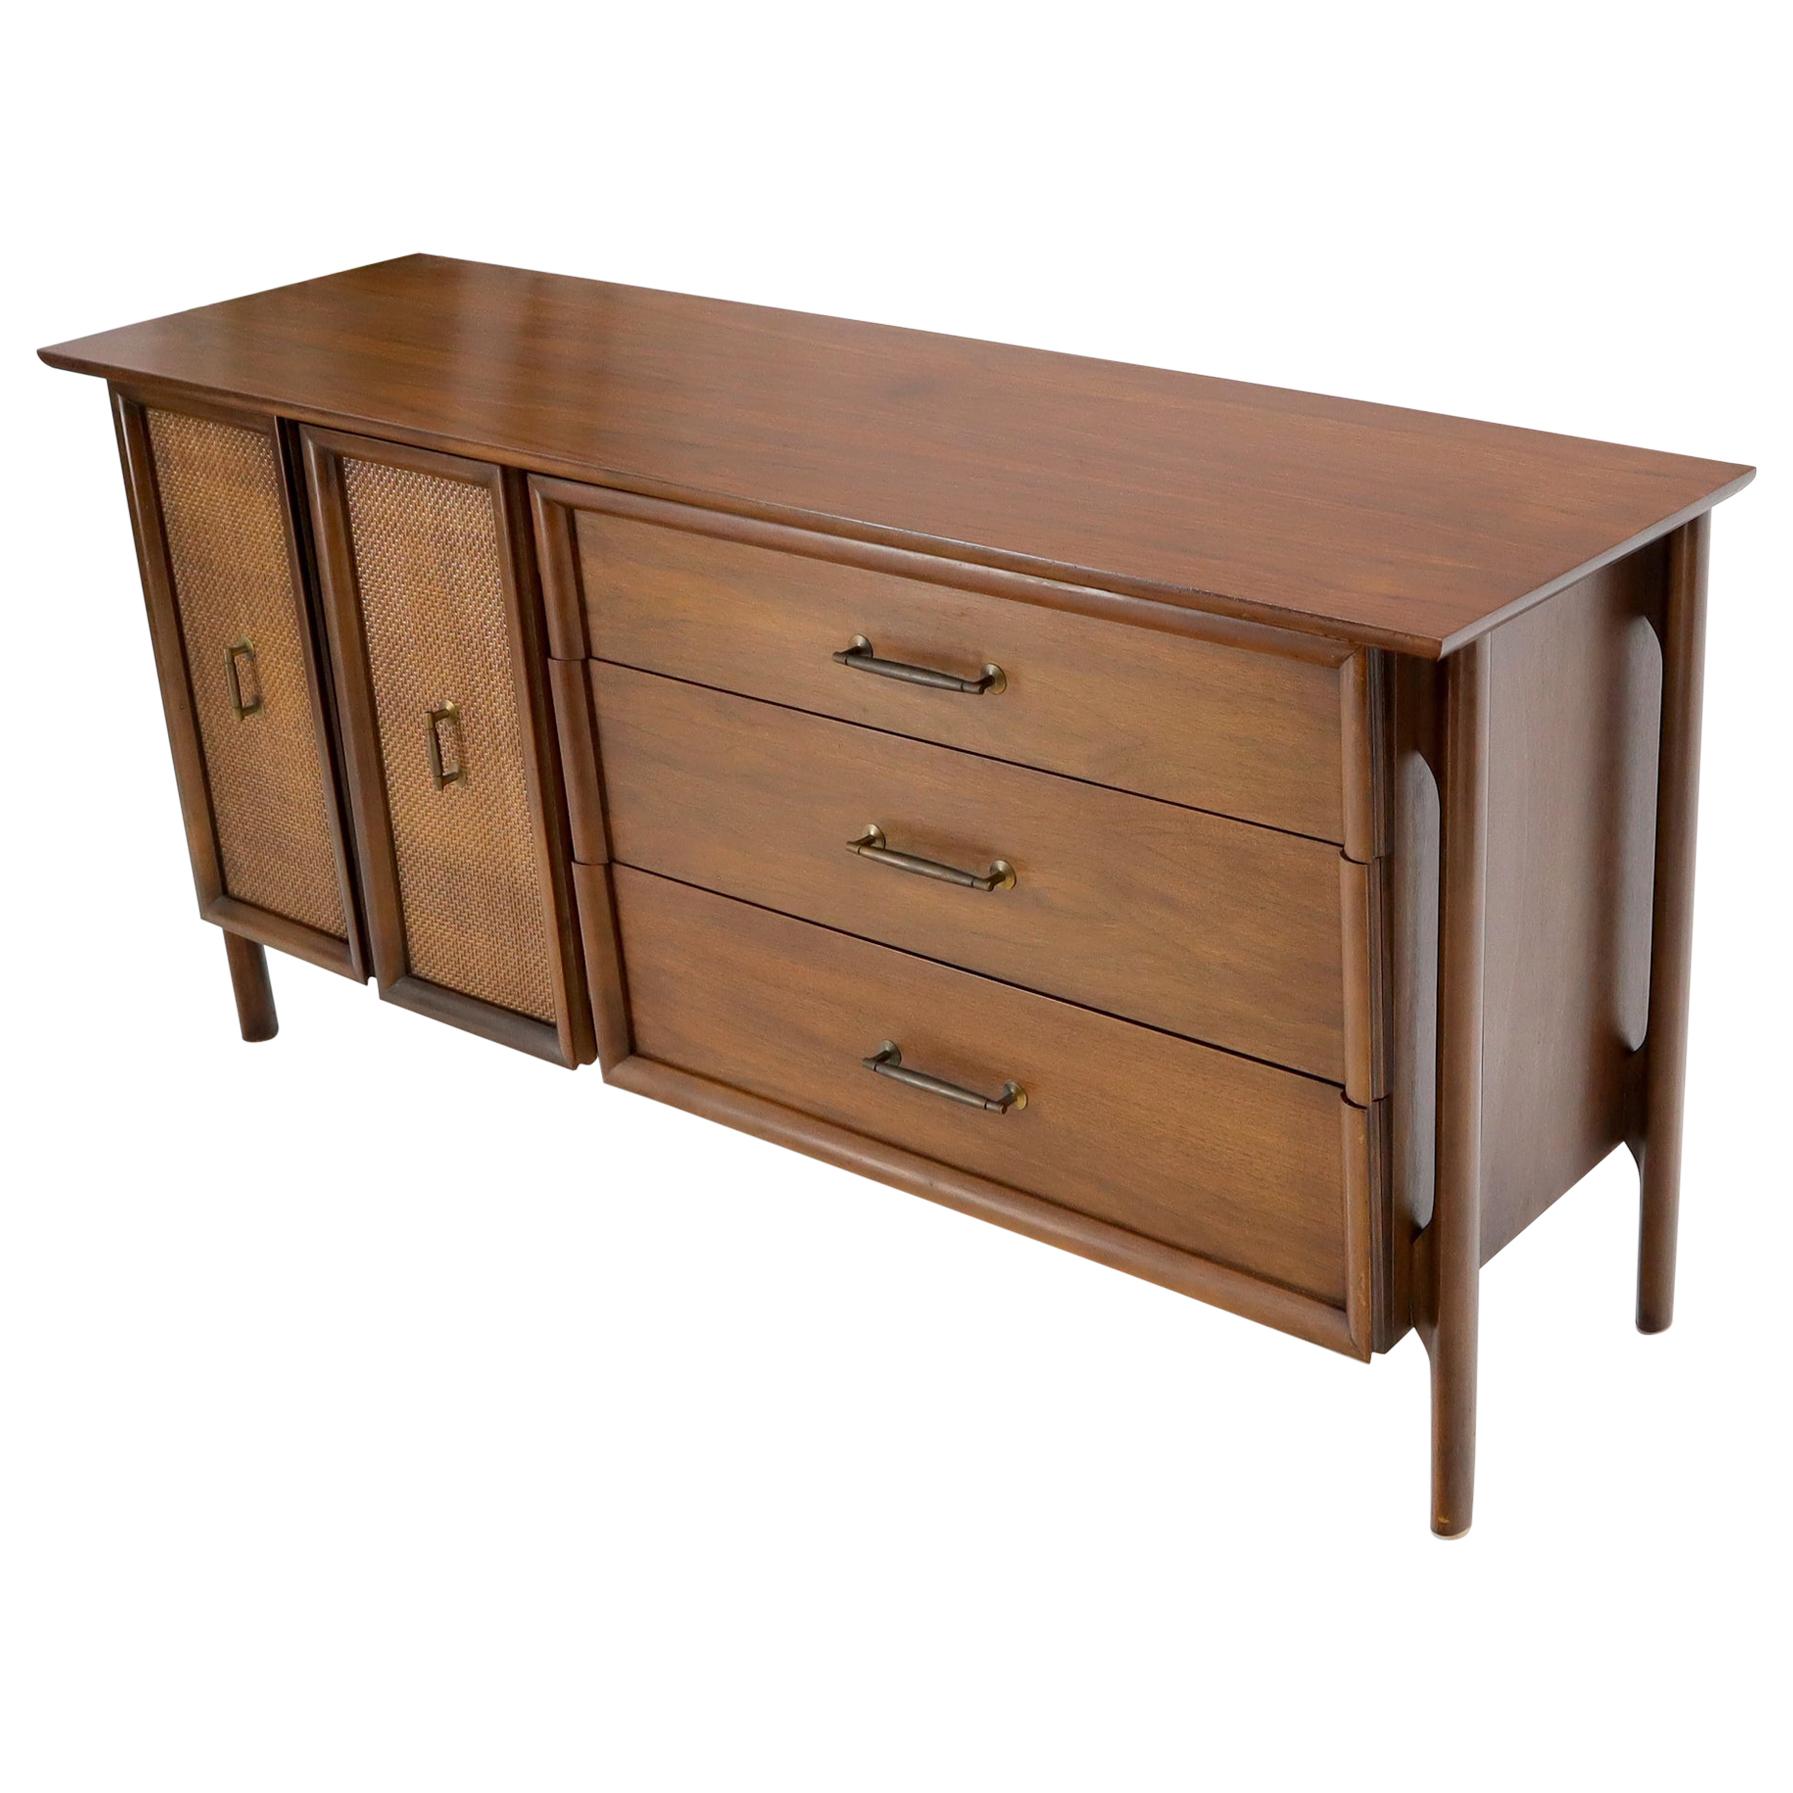 Decorative Caned Door Front Exposed Legs Walnut Credenza Dreser For Sale